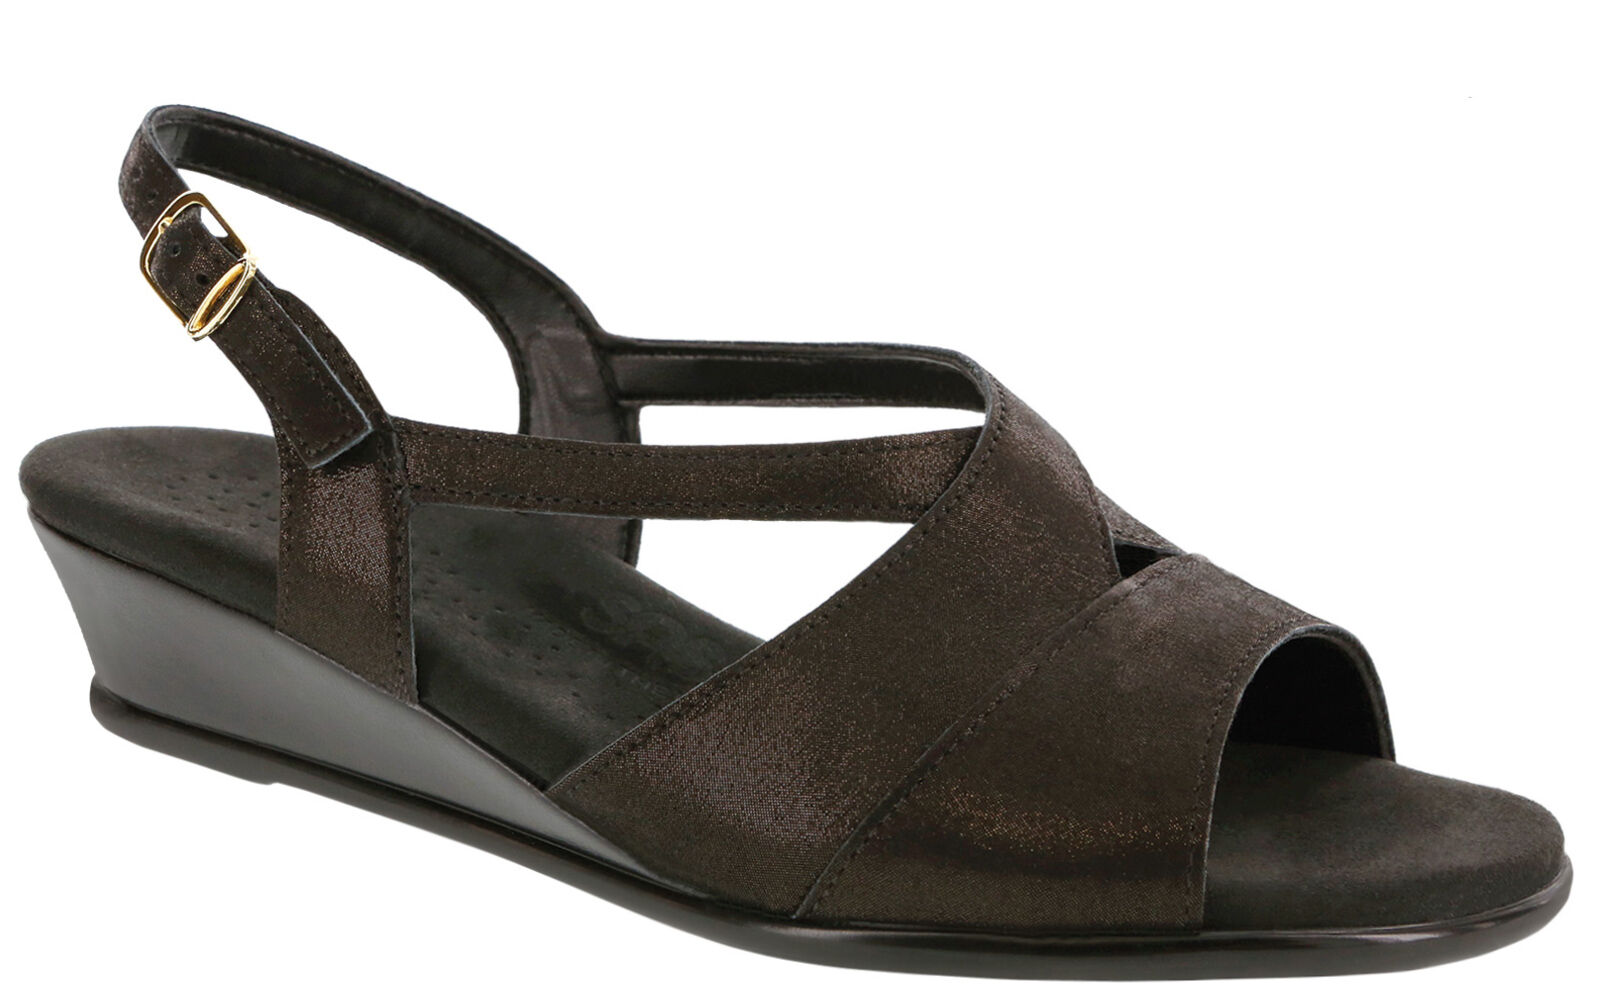 Bushnell in Black Jute Wedge Sandals | Women's Shoes by OTBT - OTBT shoes